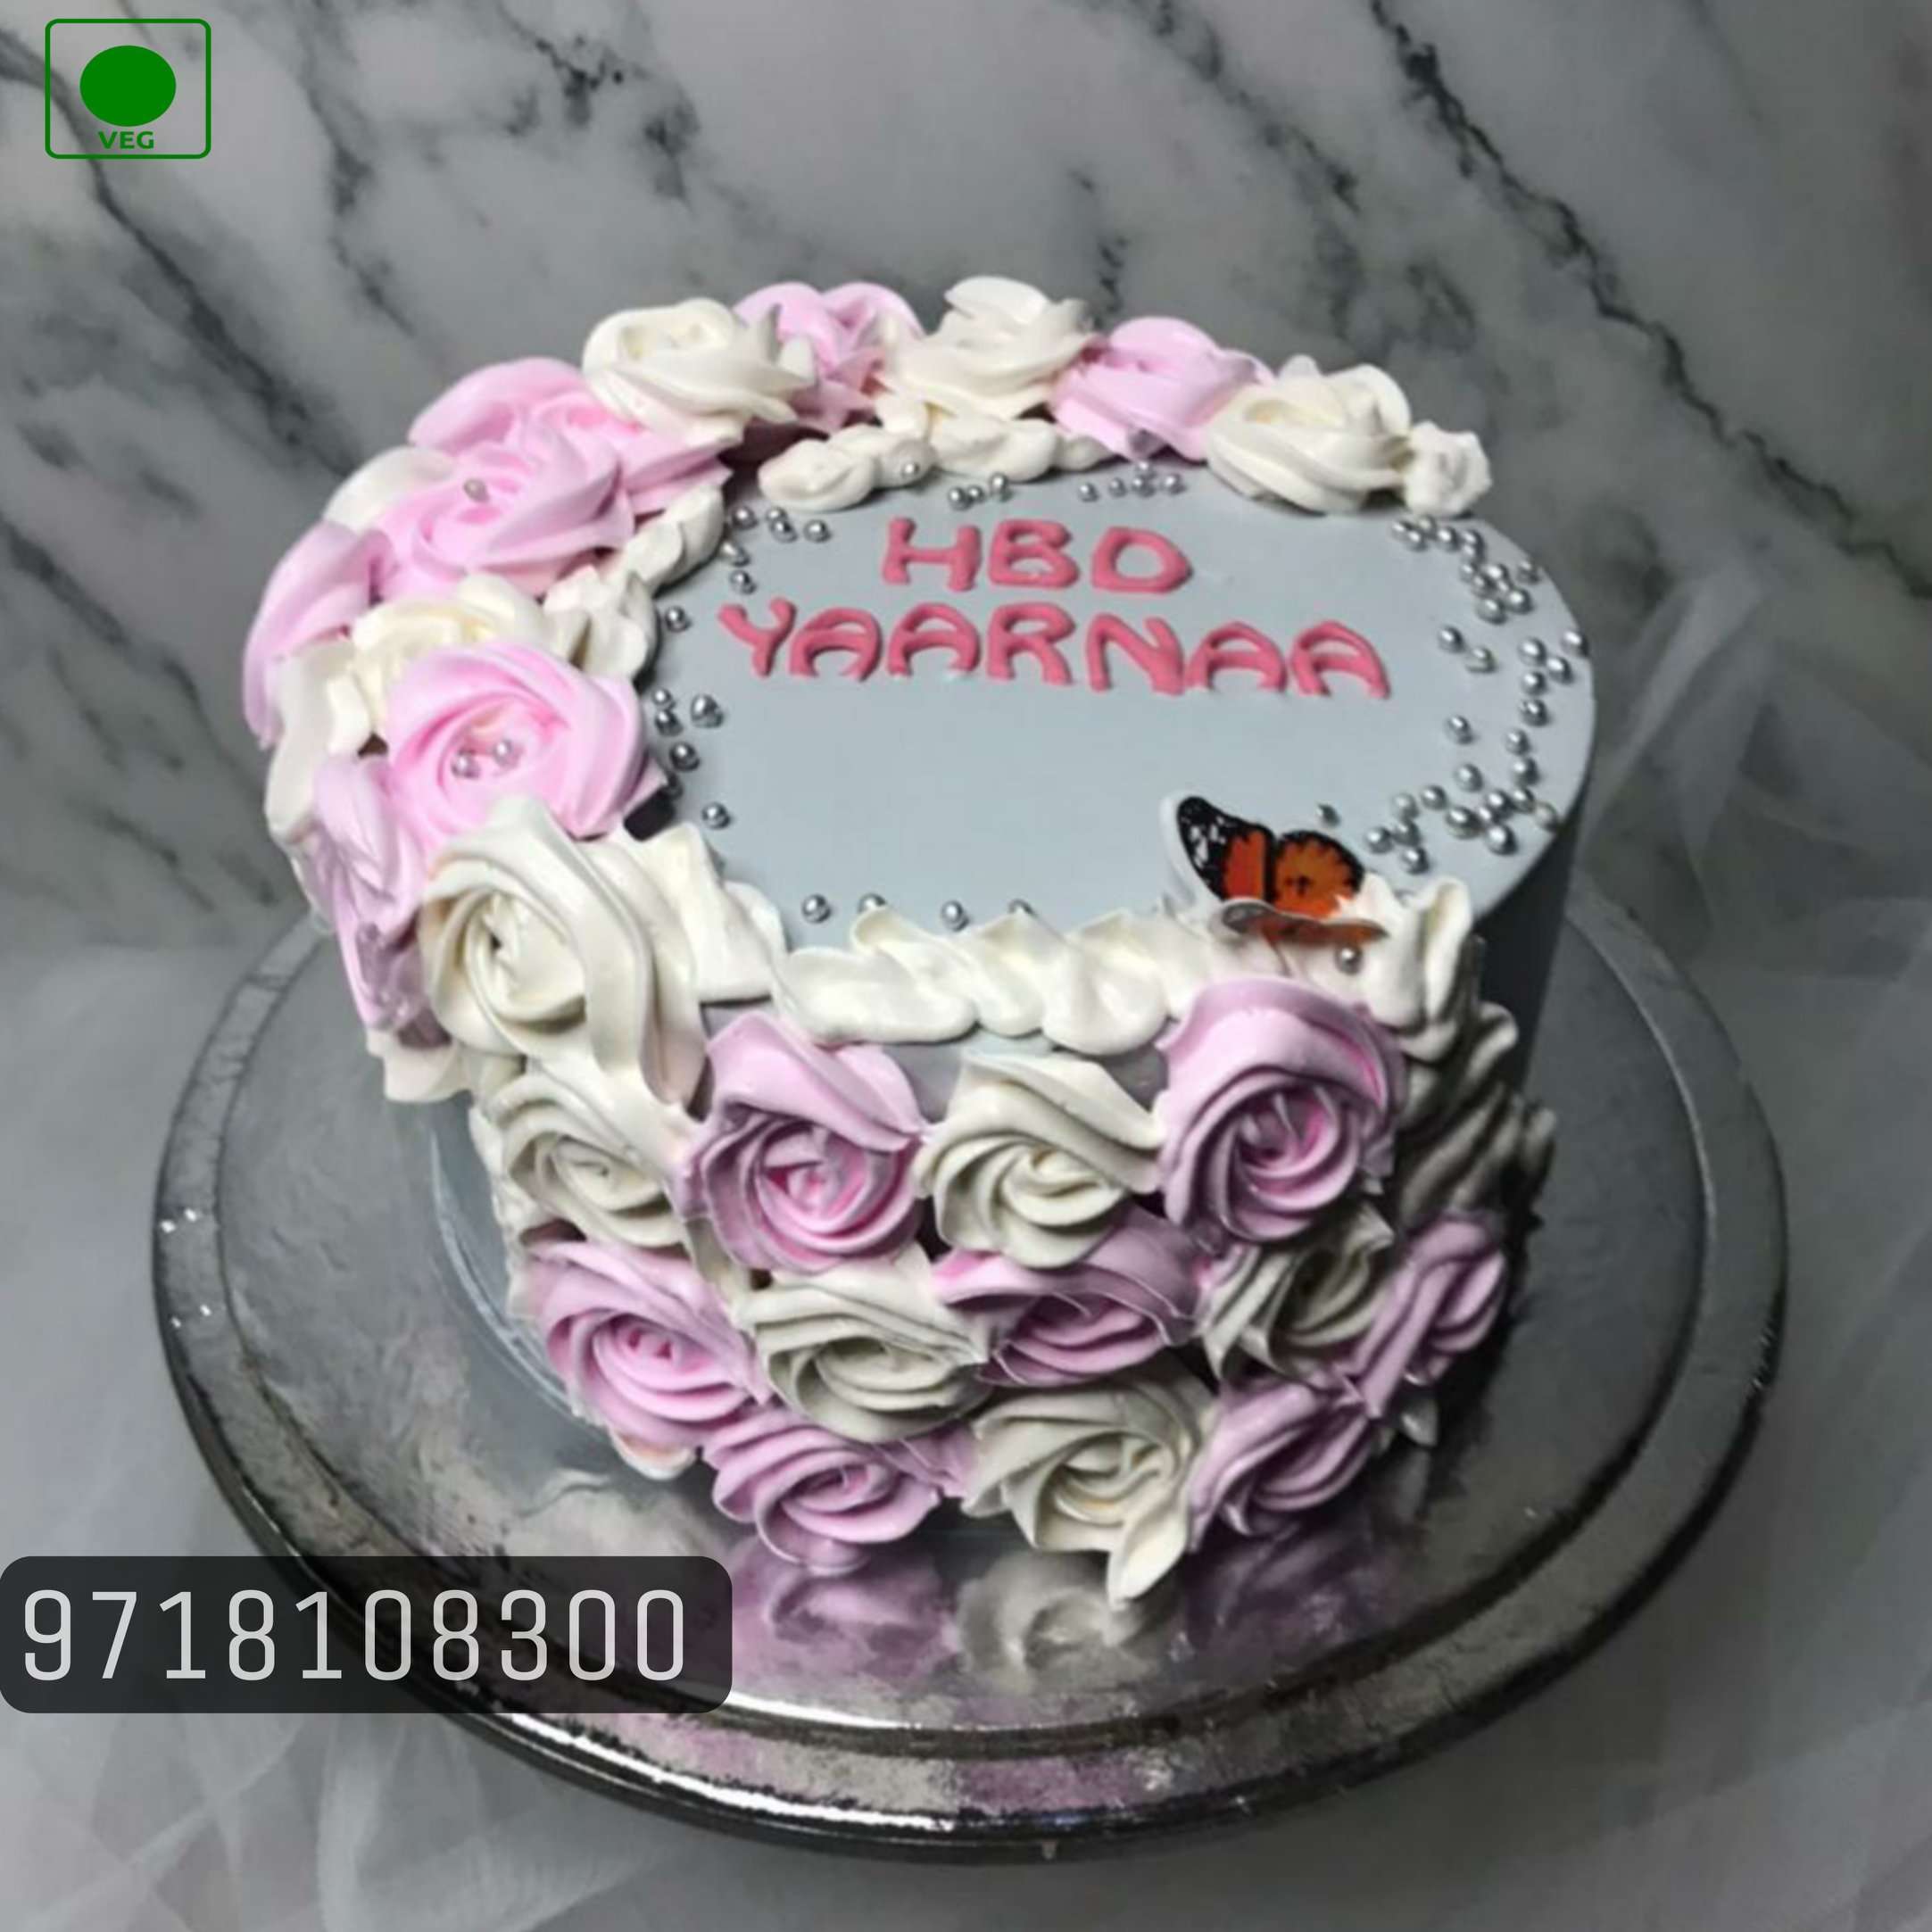 Order Couple Cakes Online, Buy and Send Couple Cakes | The Cakery Shop